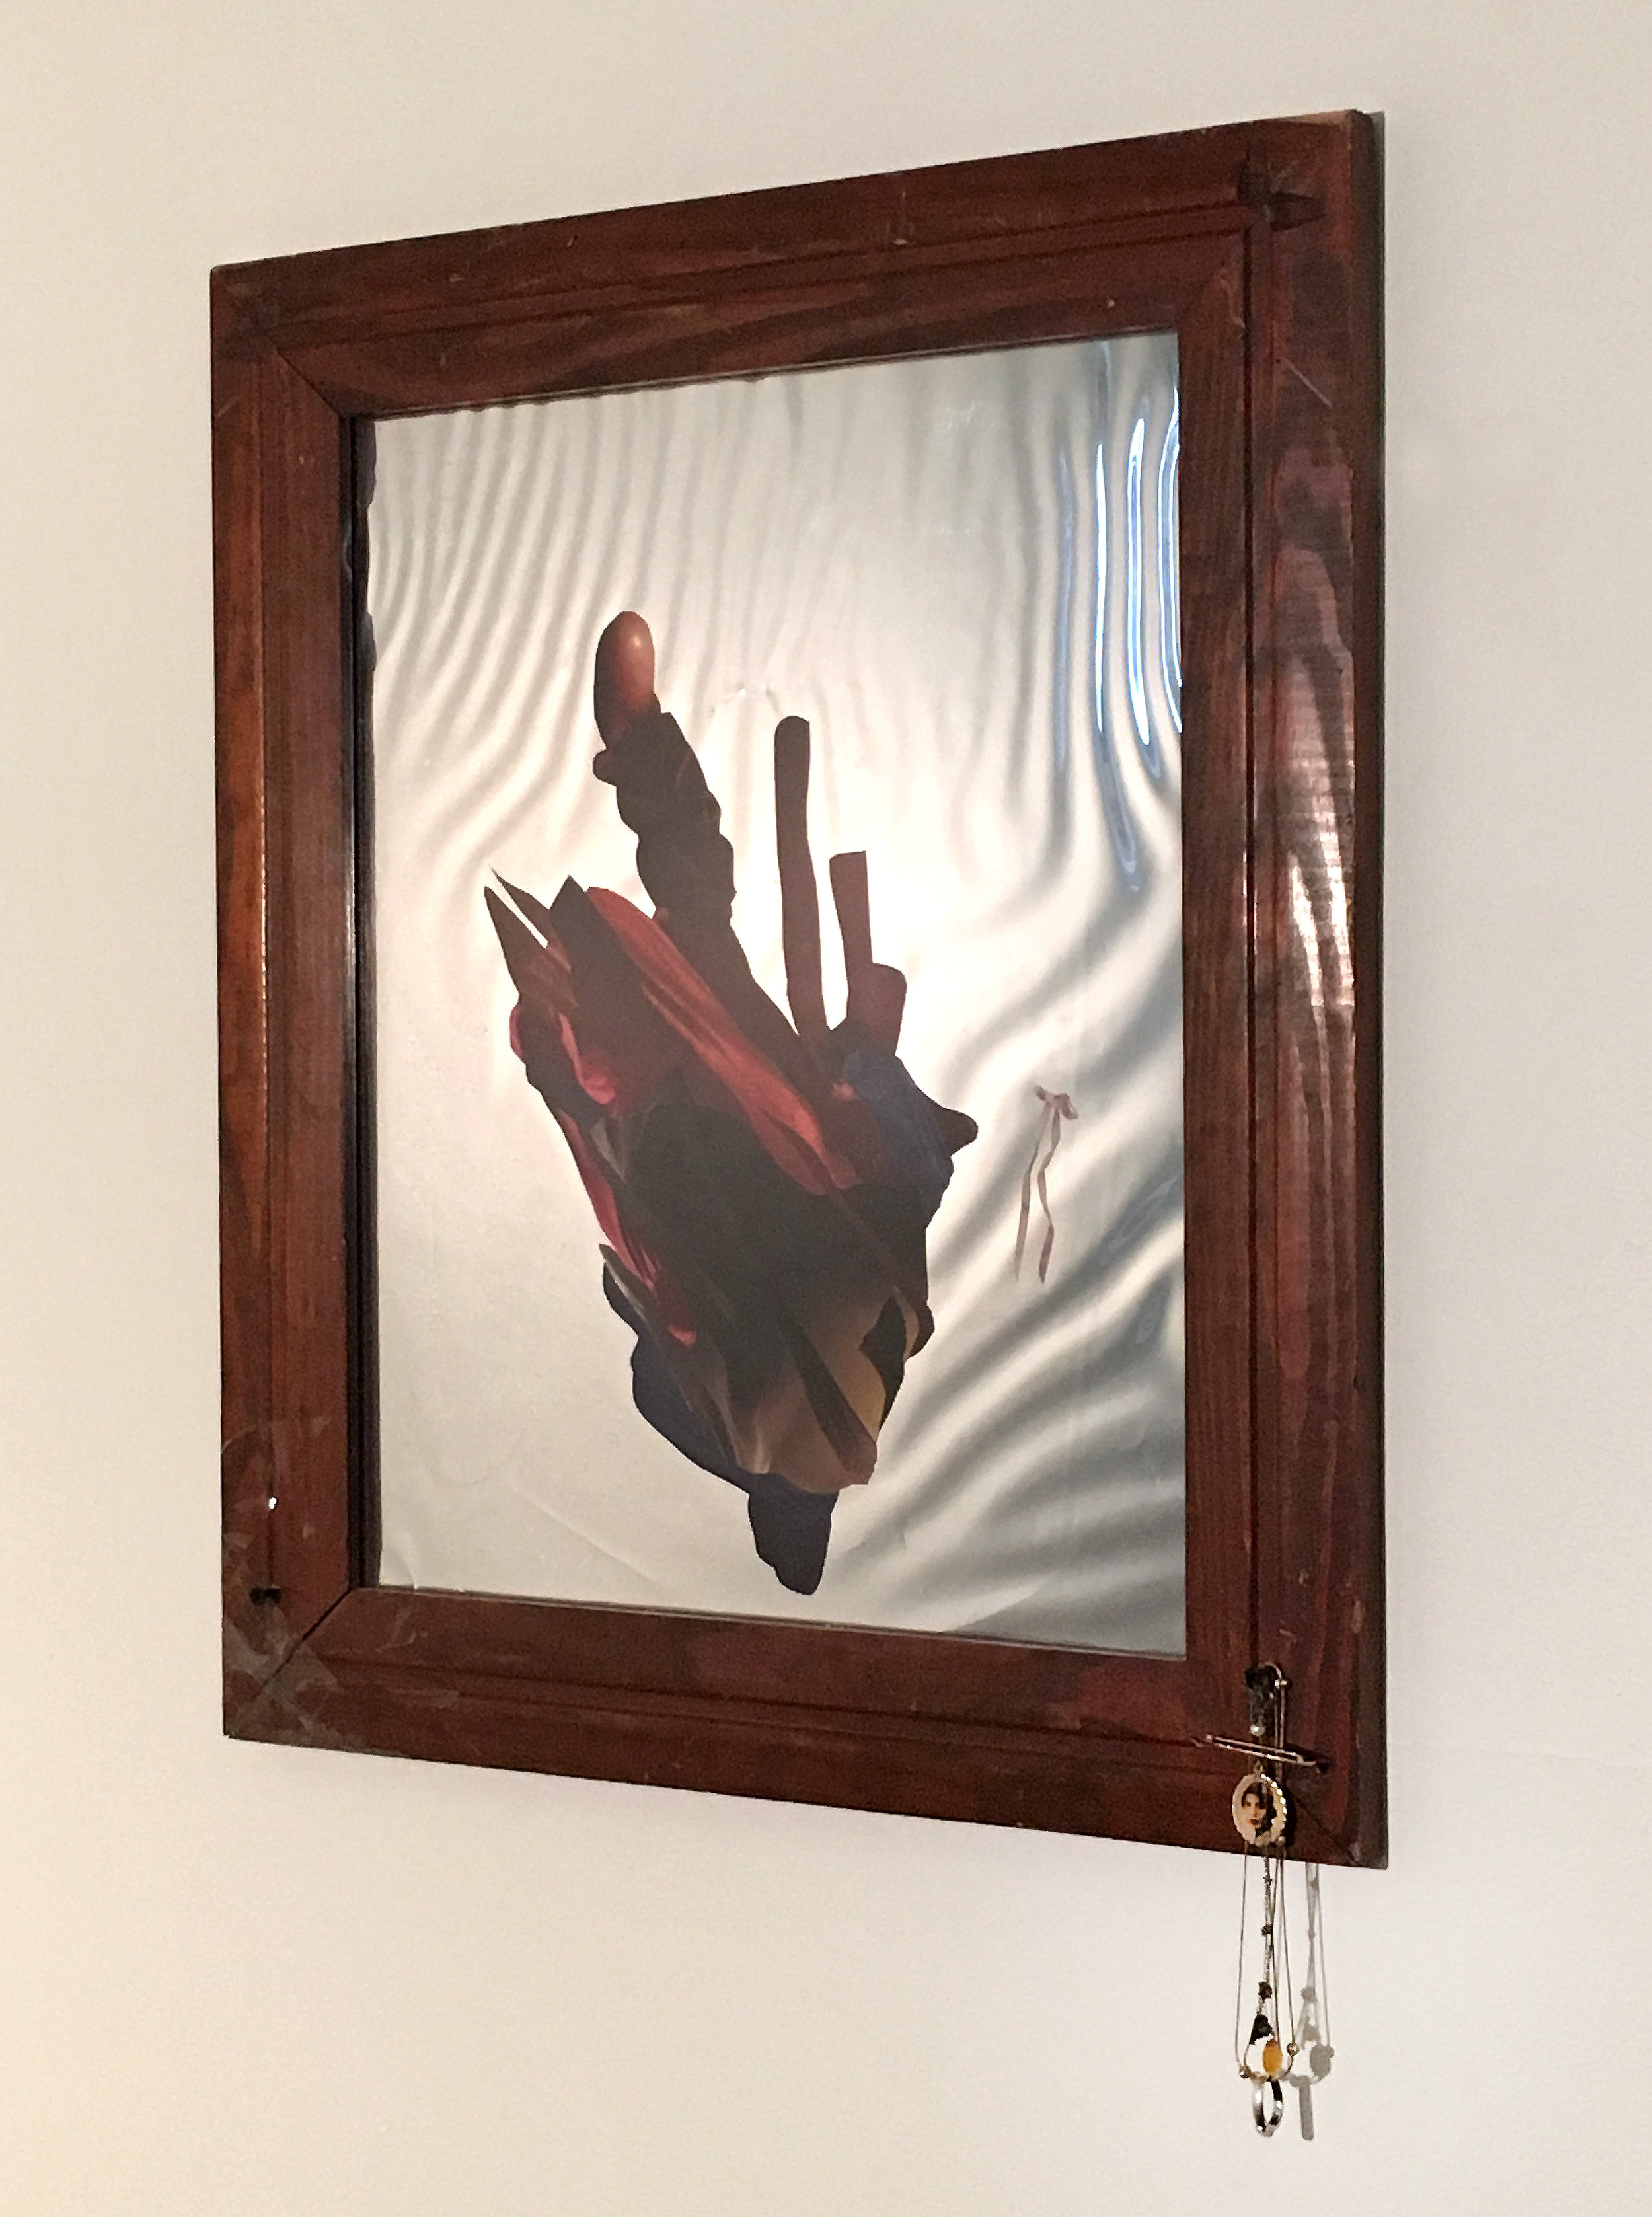   Tongue Tied, 2017    Hand-cut and assembled found images, self produced photographs, mirrored acetate, plexi, found wood frame, sterling silver and gold family heirlooms (with opal, pearl, and citrine)  24 x 20 ½” 